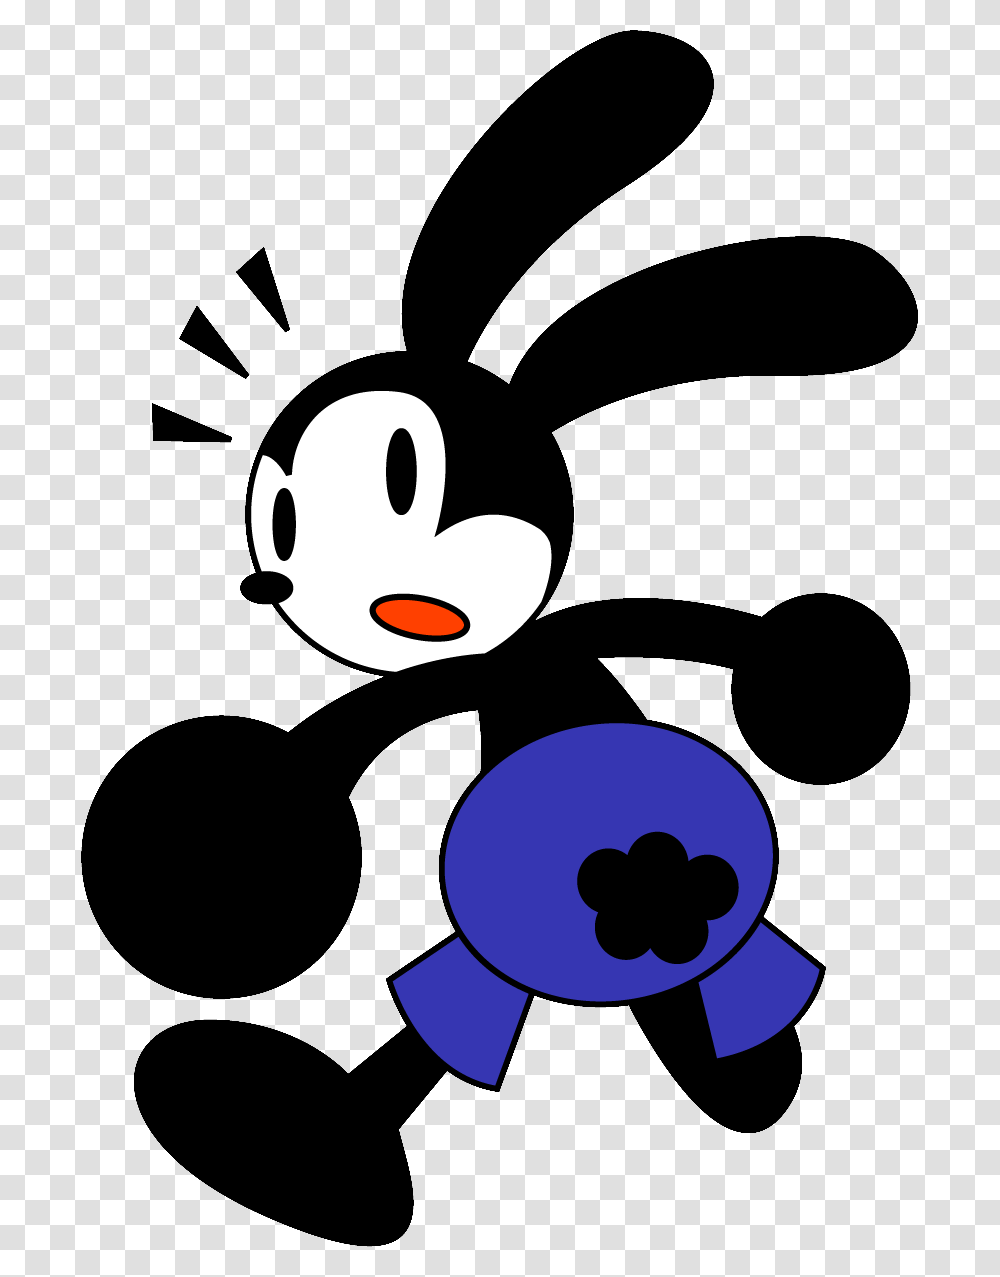 Mickey And Friends Wiki Oswald The Lucky Rabbit And Friends, Stencil, Silhouette Transparent Png